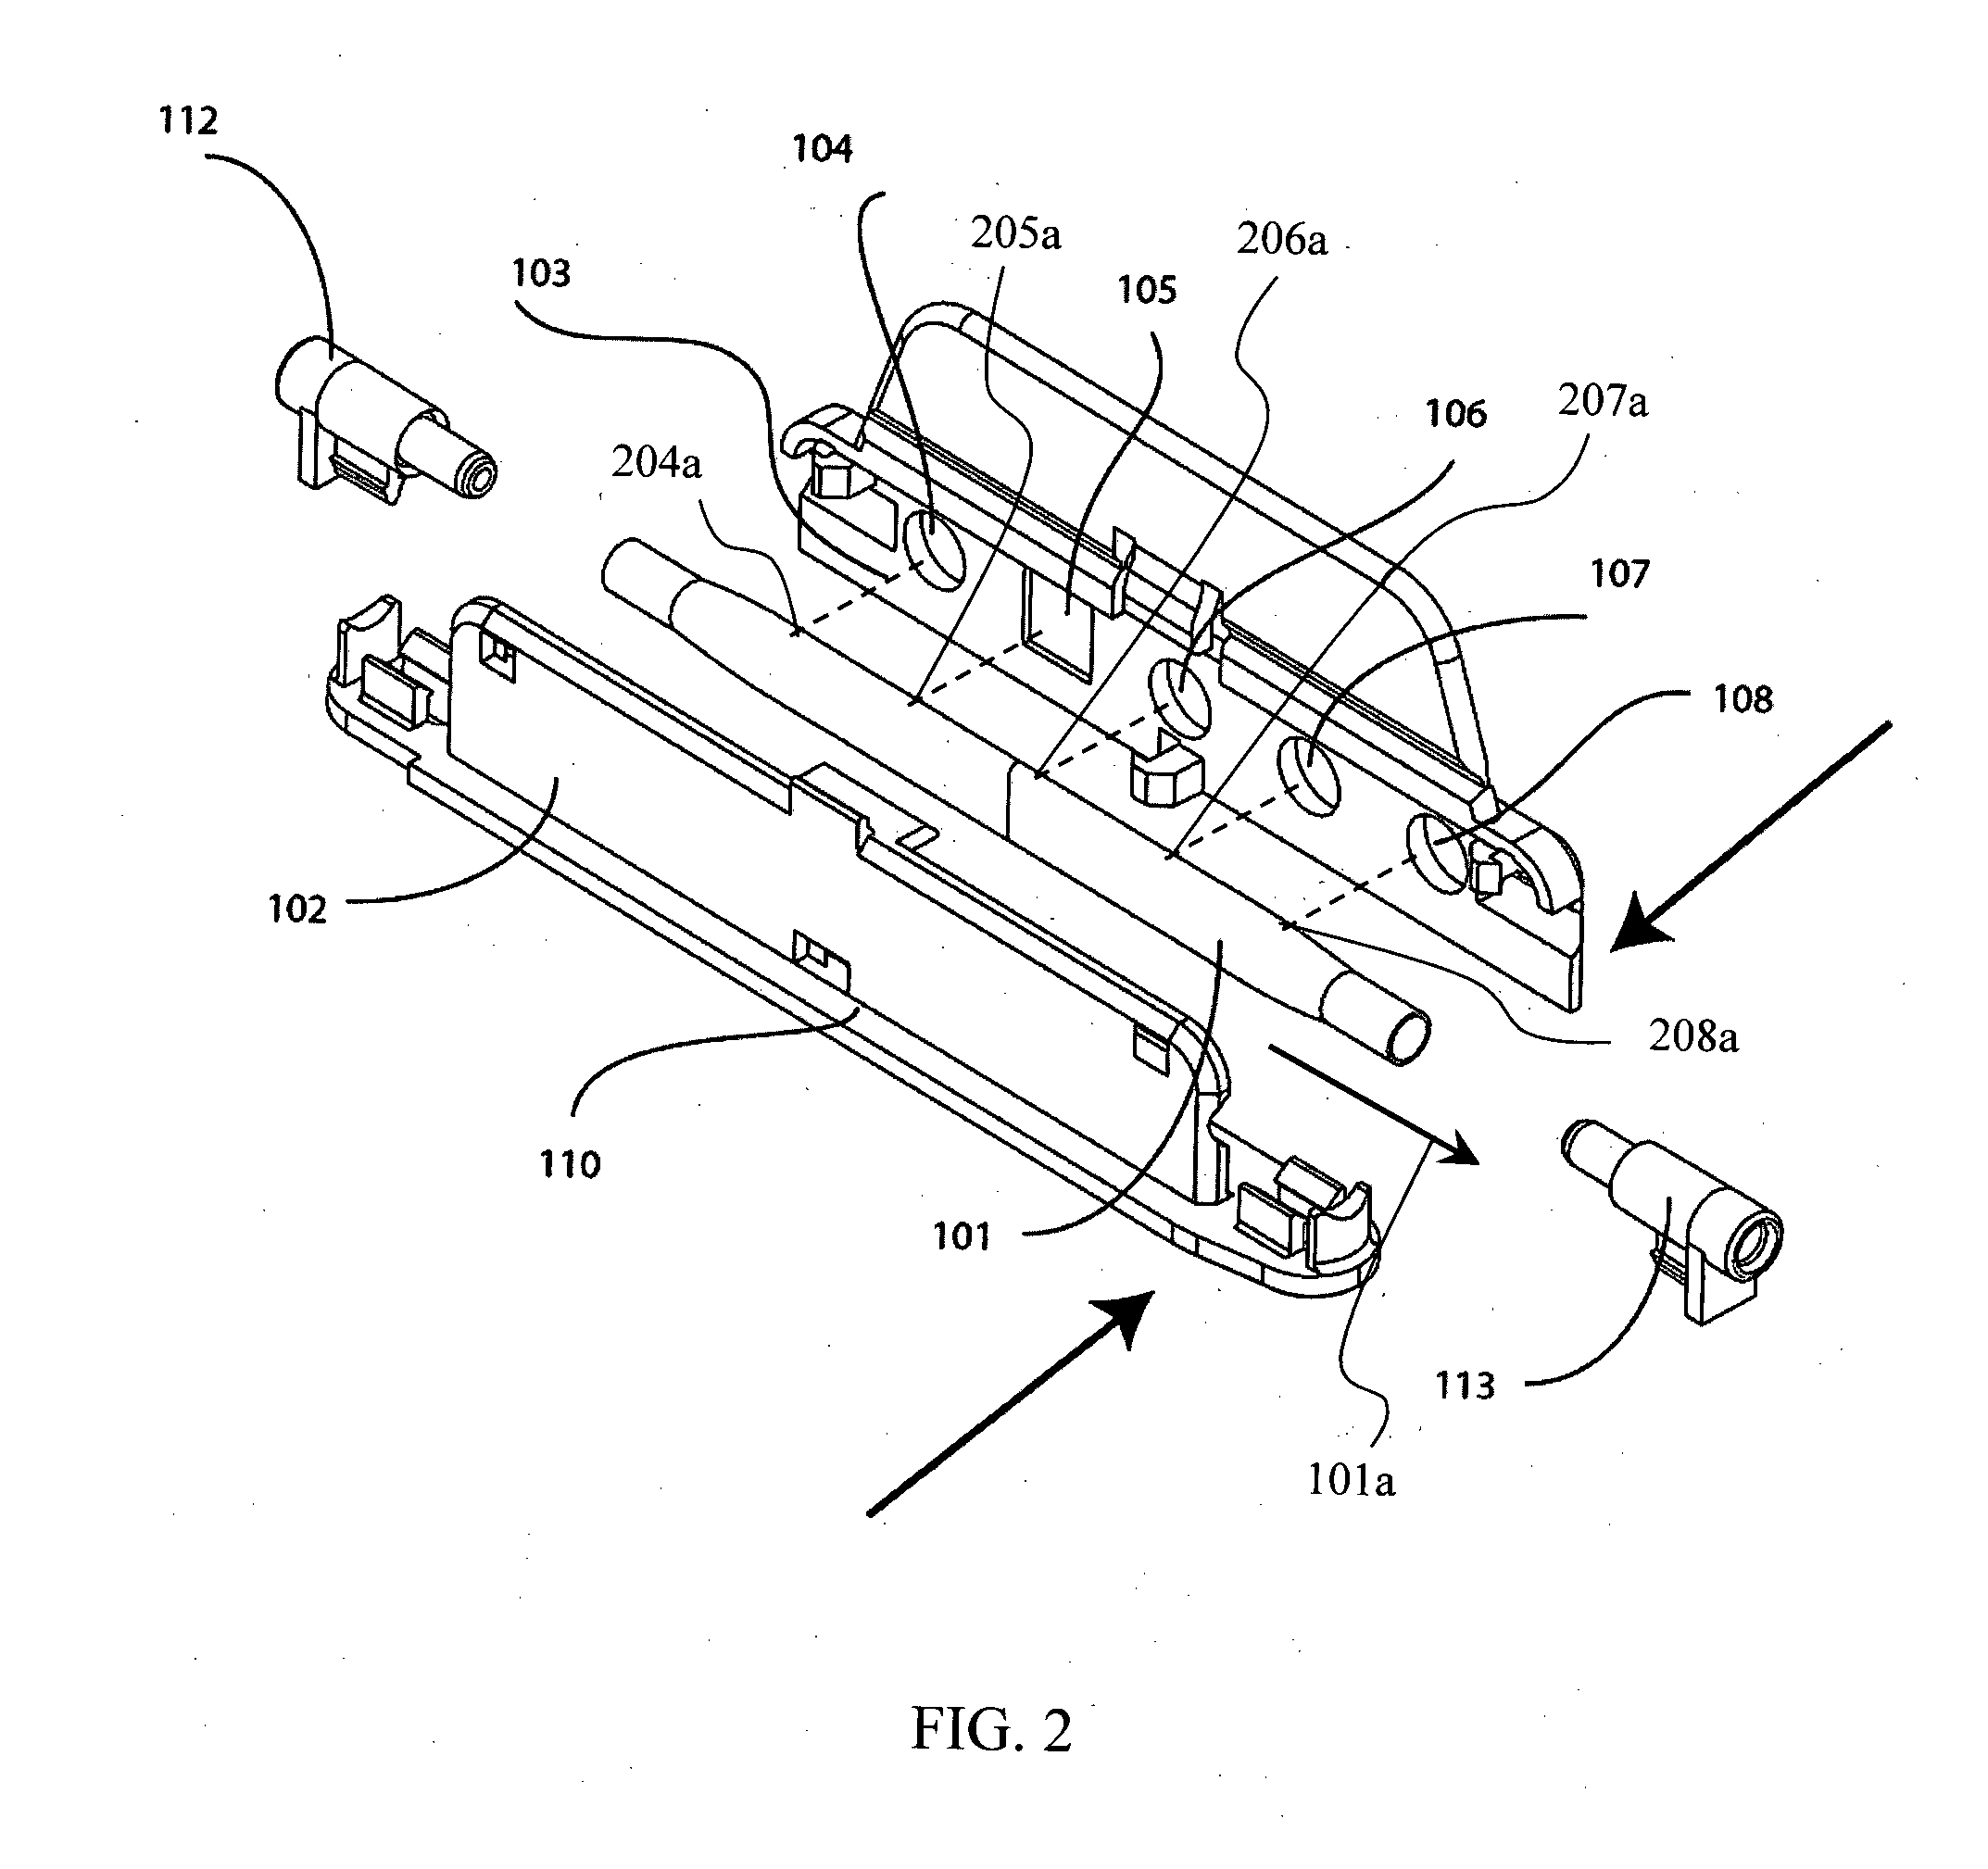 Intravenous (IV) infusion monitoring method and system